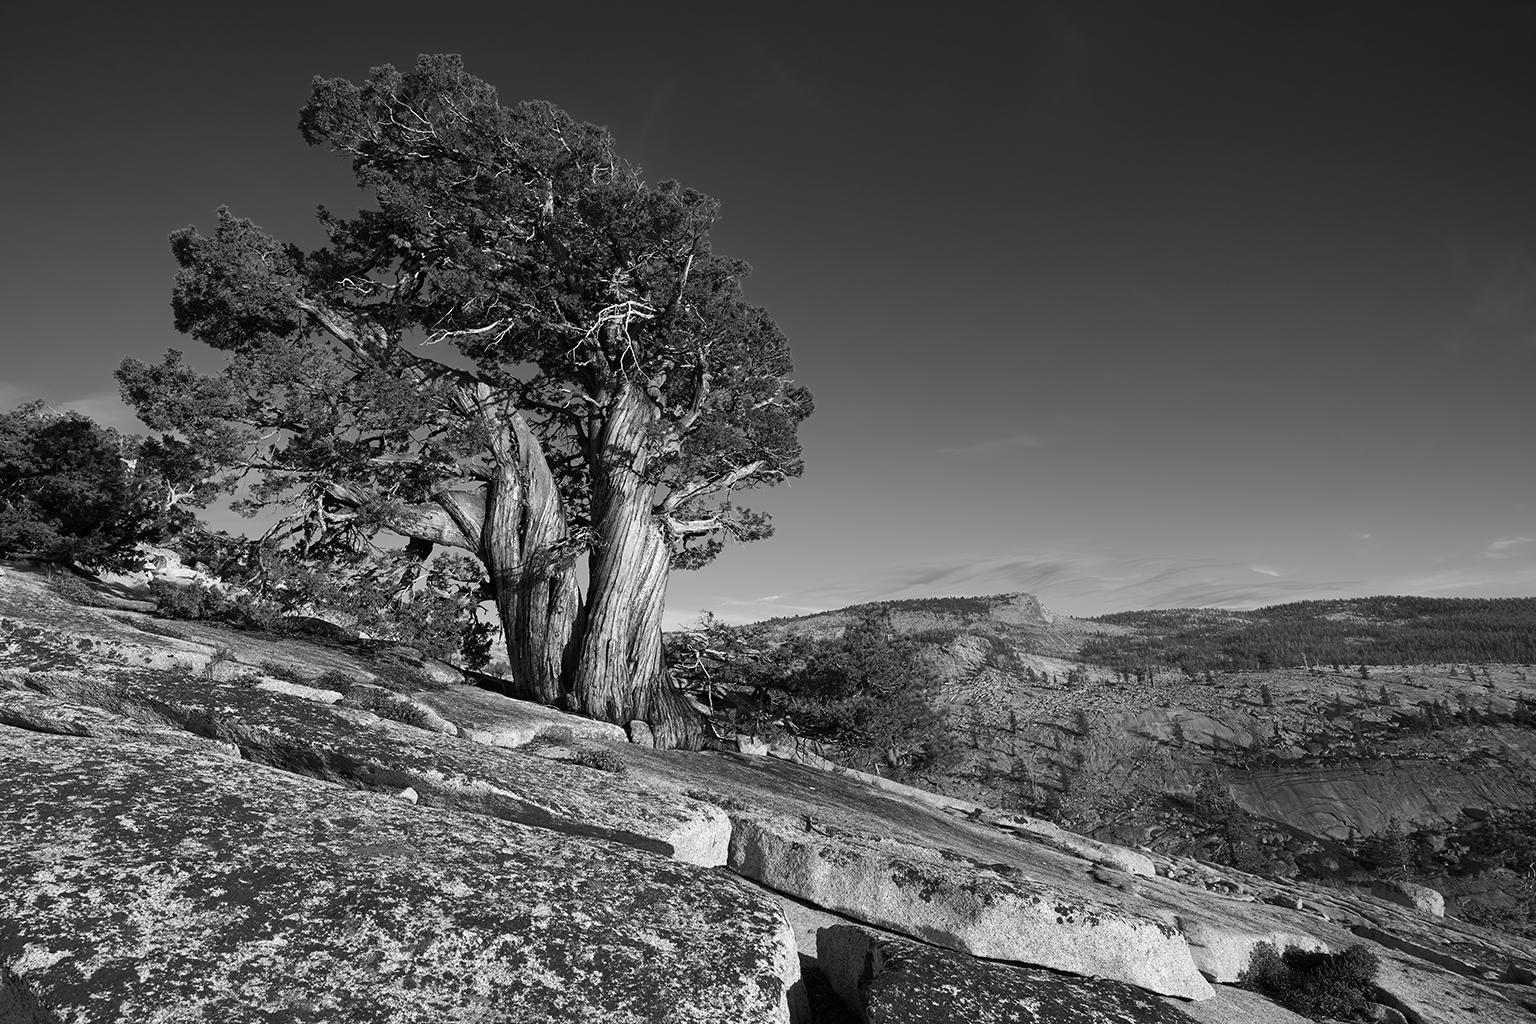 Frank Schott Black and White Photograph - Tree Study II - large format b/w photograph of lone ancient tree in landscape